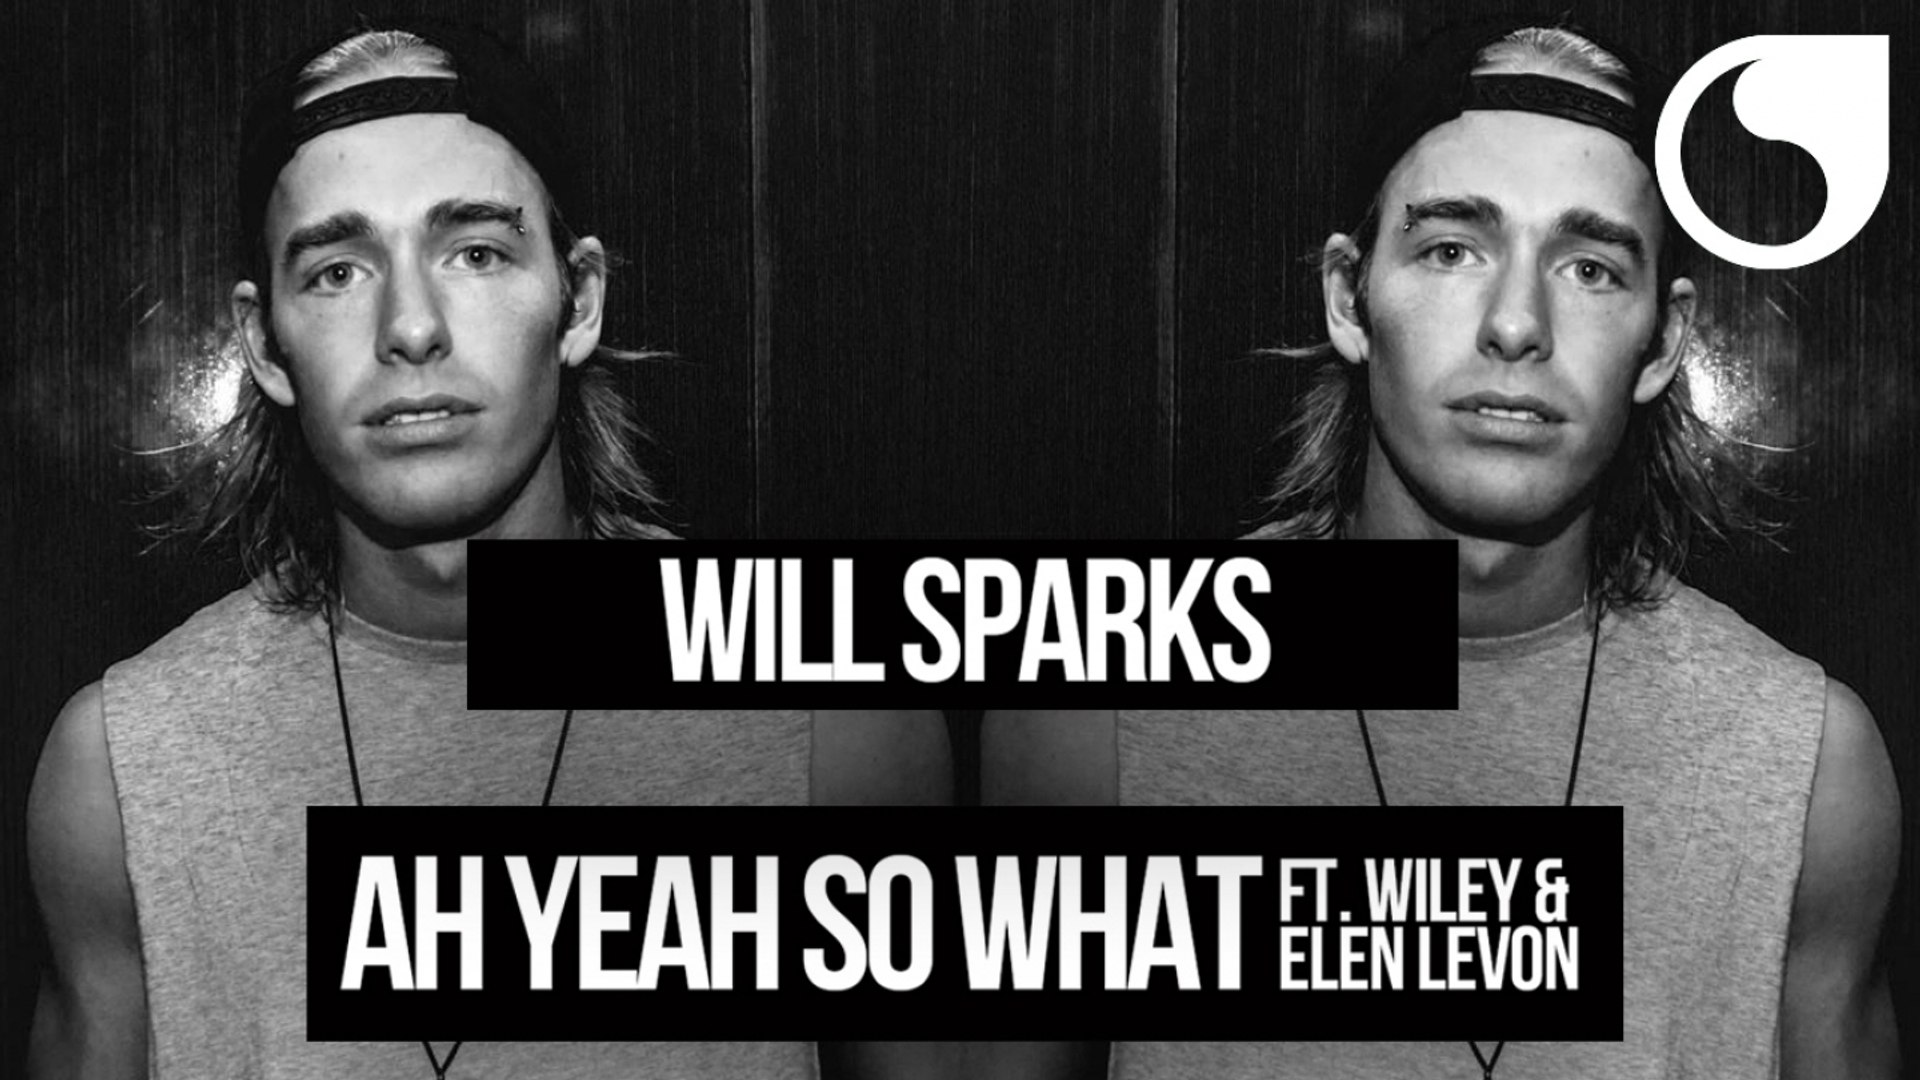 Will Sparks Ft. Wiley & Elen Levon - Ah Yeah So What (SCNDL Remix) - Vidéo  Dailymotion